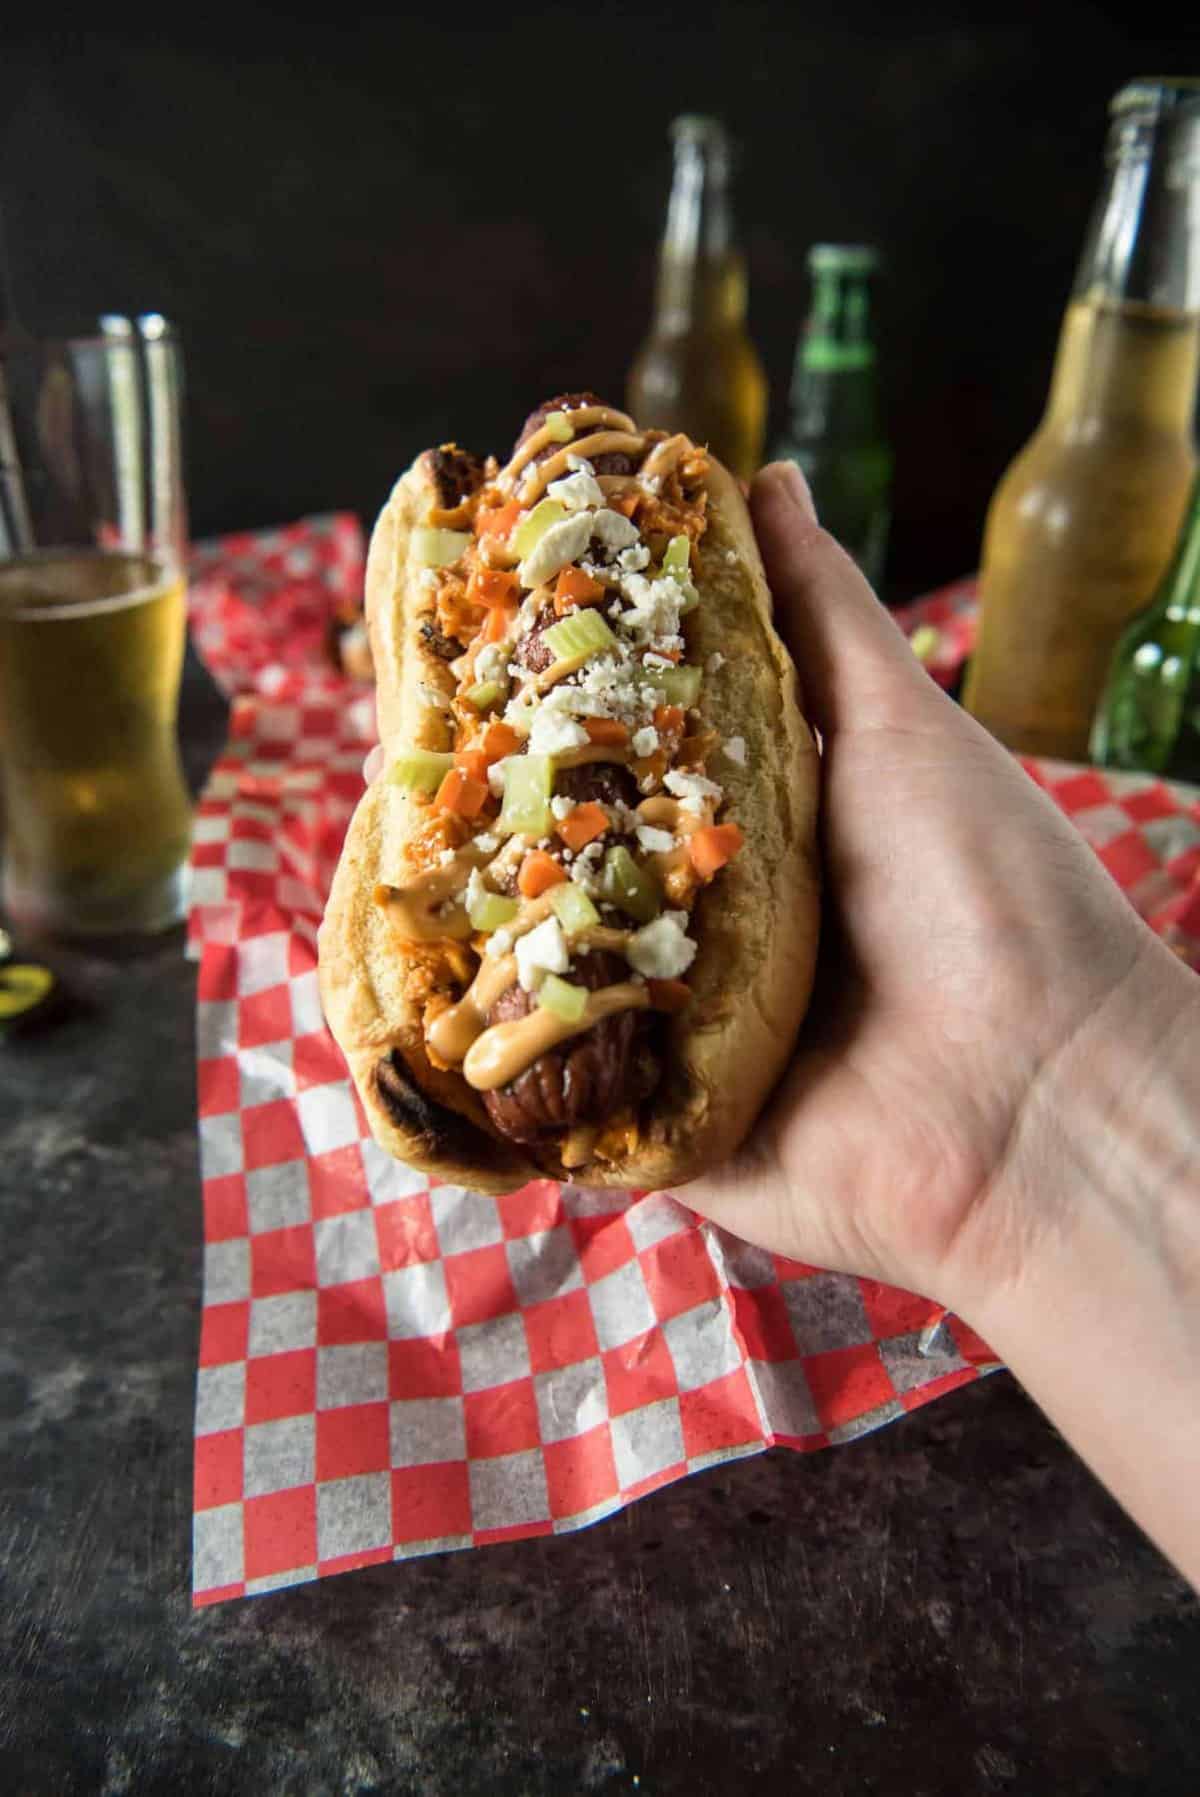 Summer grilling with a kick! Top your Buffalo Hot Dogs with shredded Buffalo chicken, zesty Buffalo mayo, chopped celery & carrots, and blue cheese (or Feta for BCHaters) for a change of pace in your hum-drum dog game!